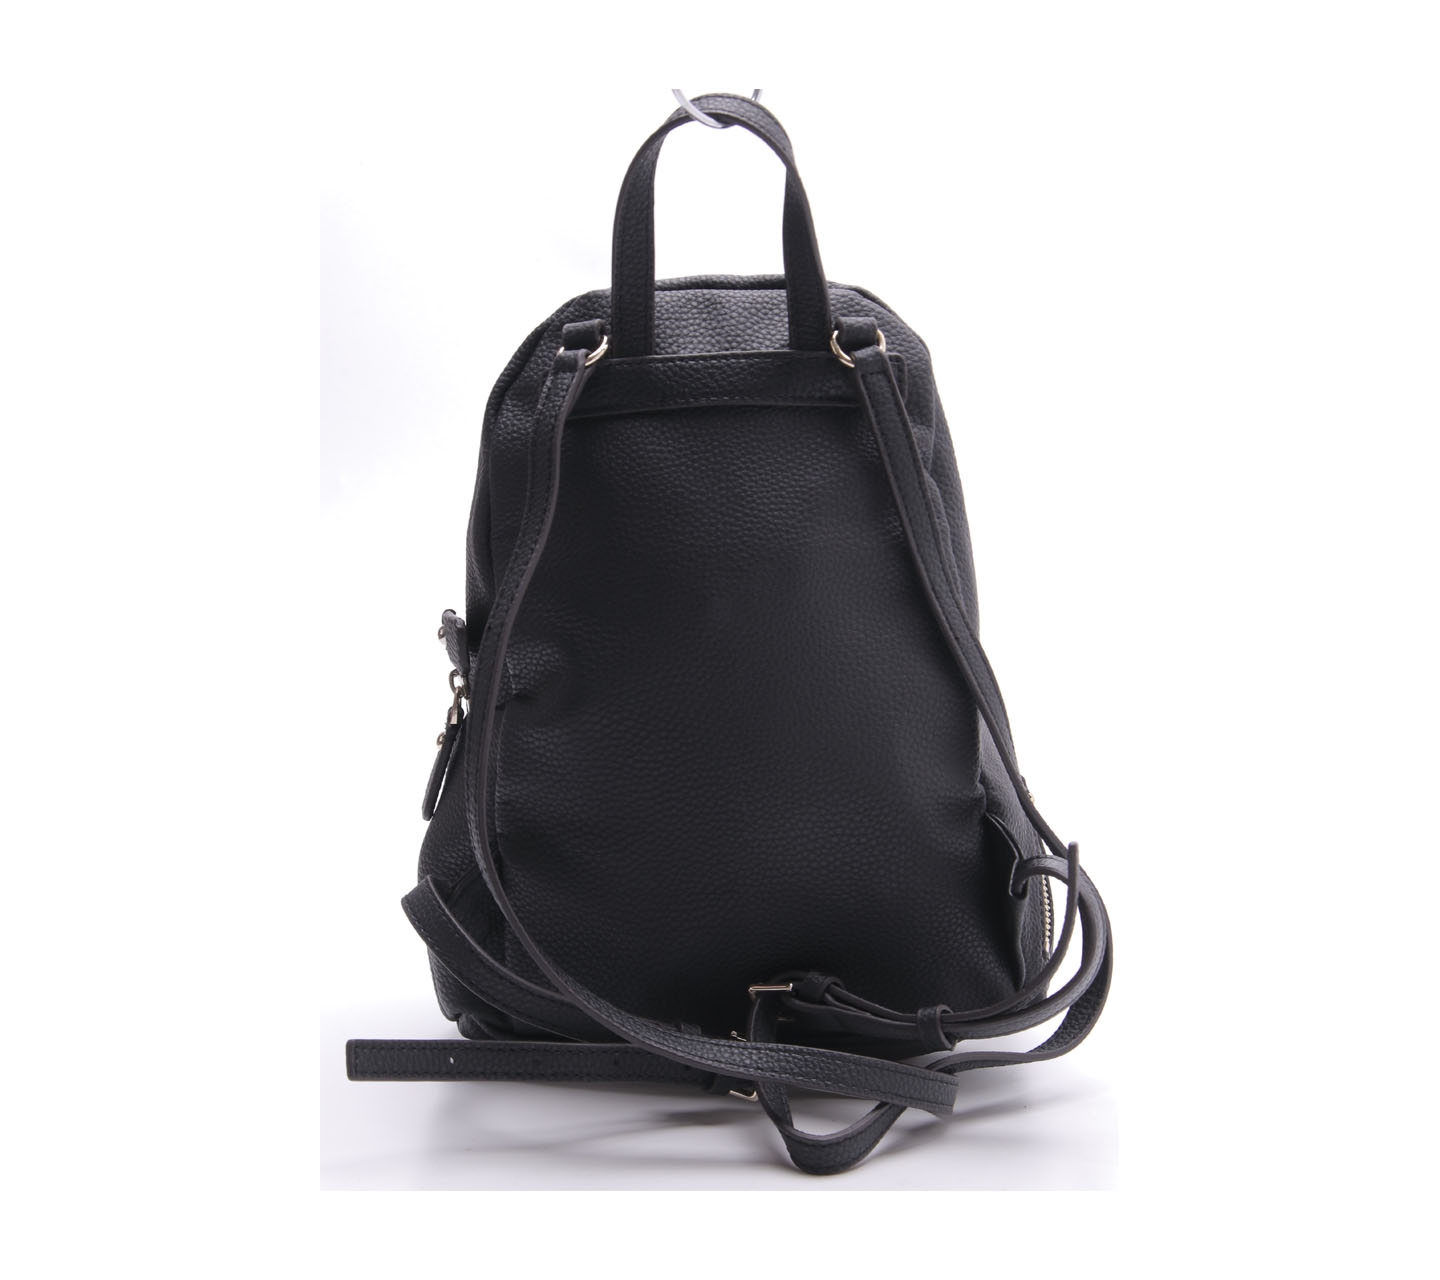 Guess Black Backpack